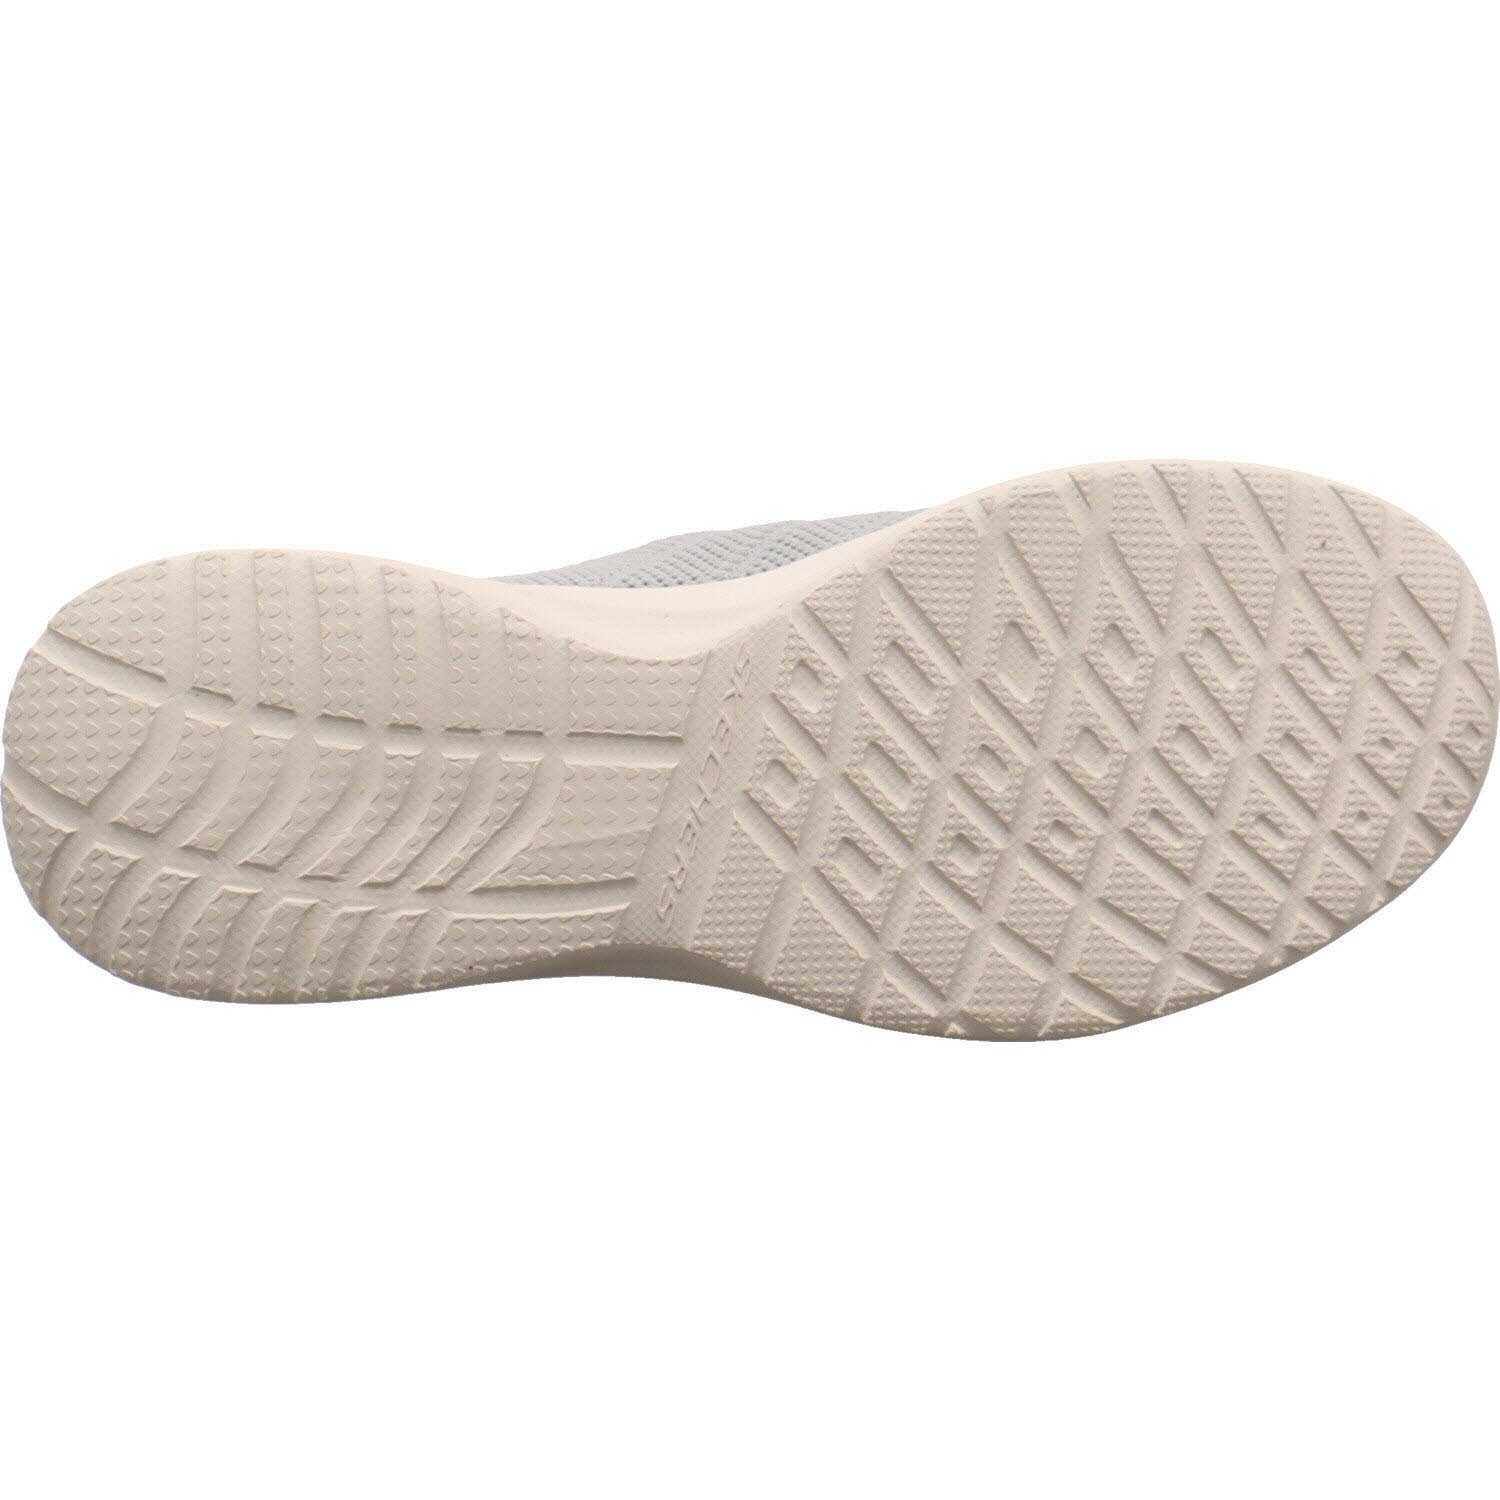 Skechers Skech-Air - Perfects Dynamight Slipper